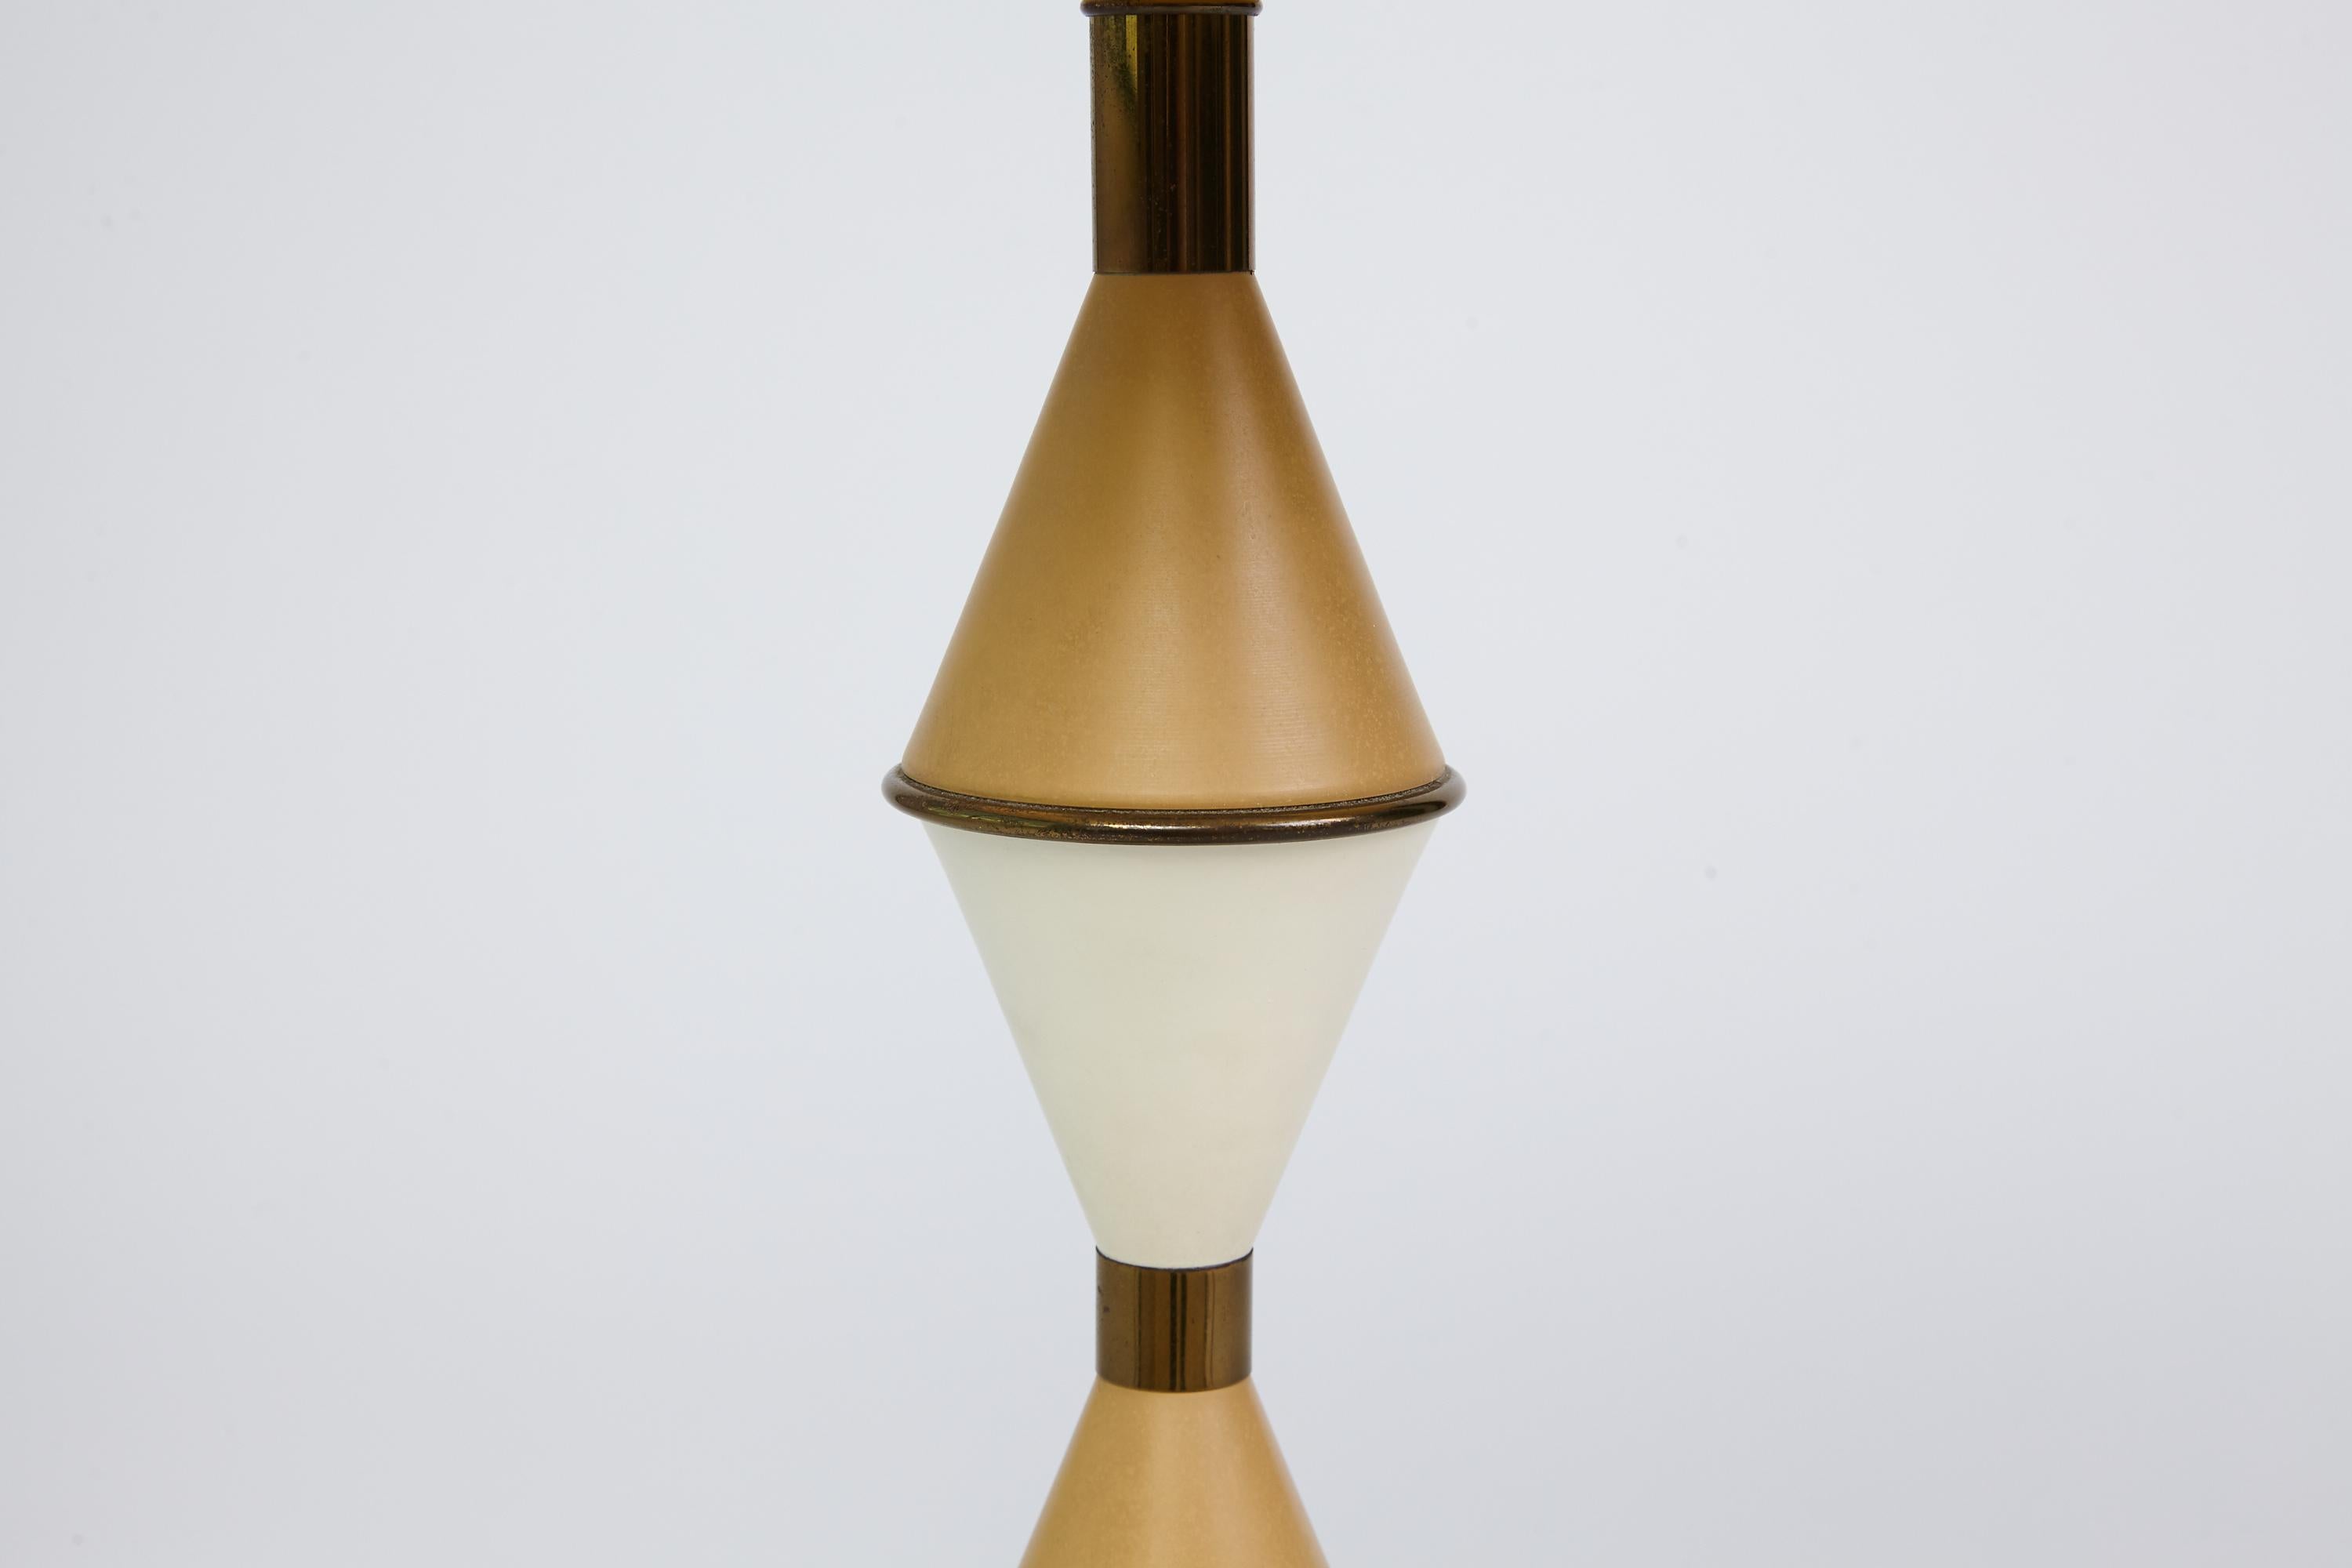 Pair of Mid-Century Modern two-toned enameled stacked cone design lamps in the style of Gerald Thurston for Lightolier. Shades shown just for display and not included.